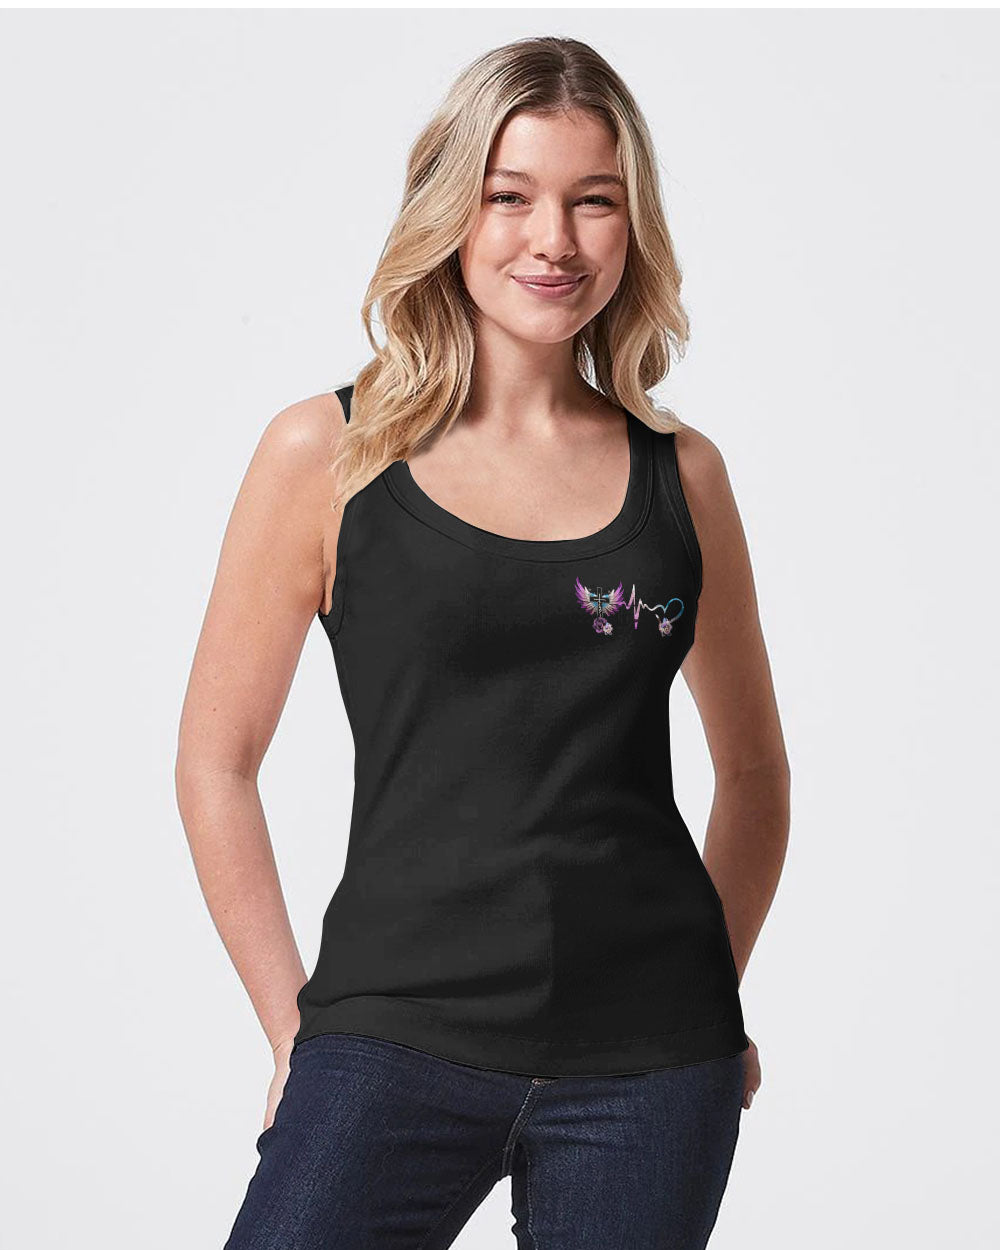 Floral Rose Butterfly Wings Women's Christian Tanks